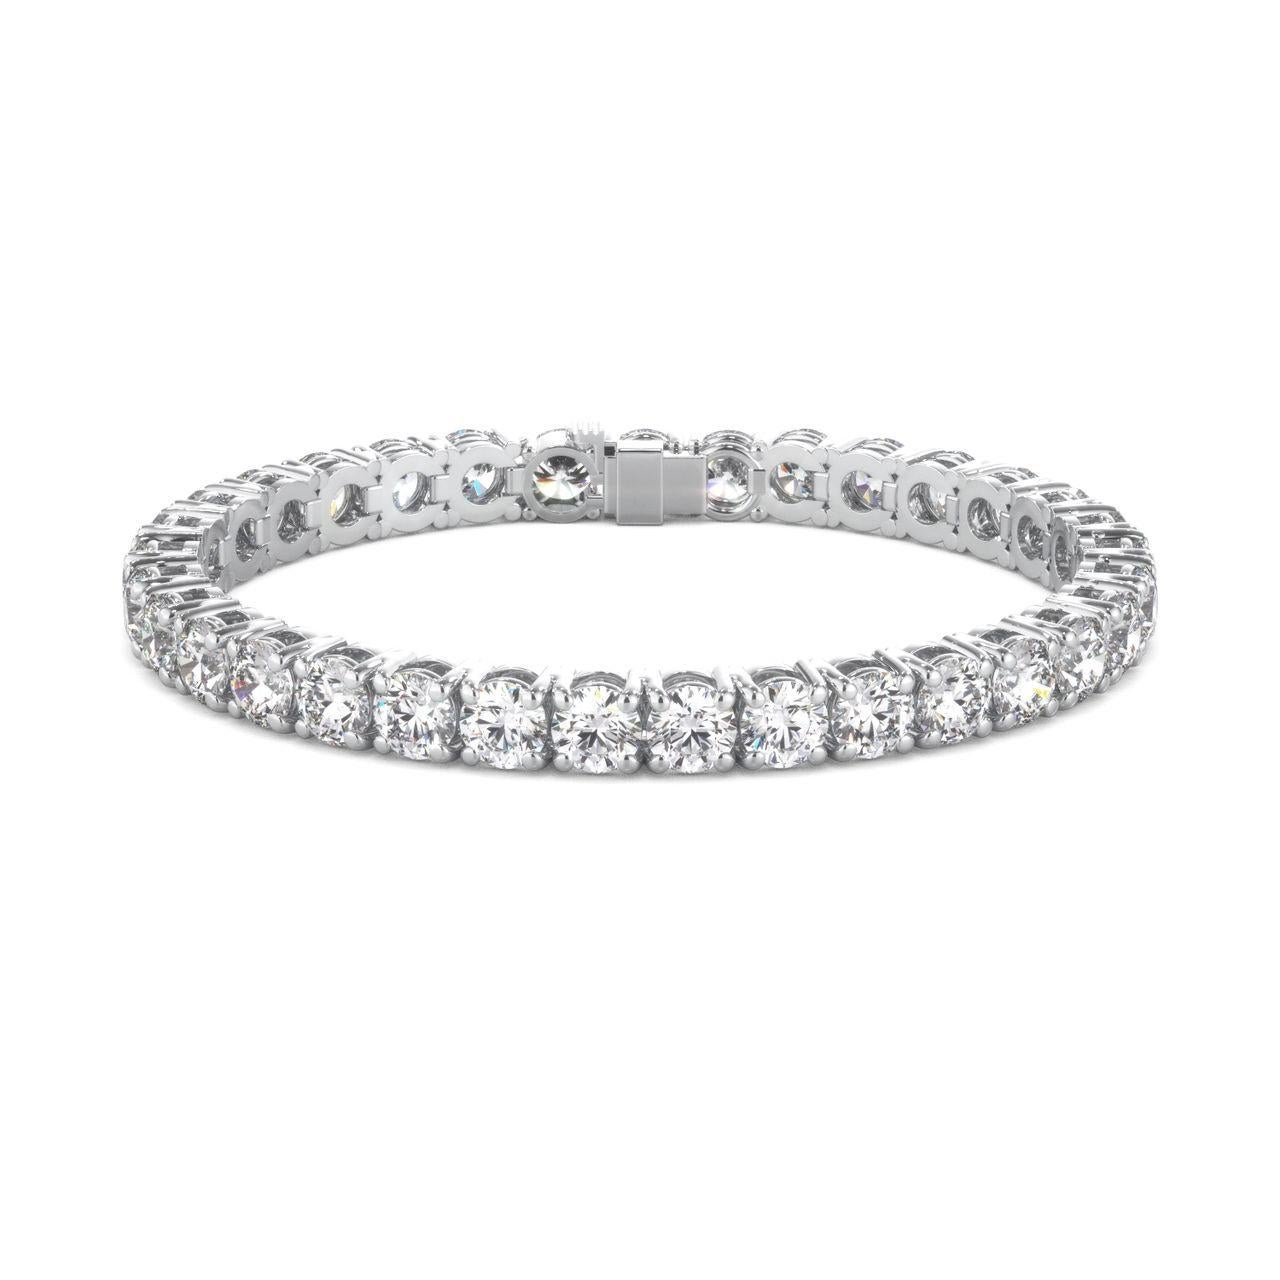 GIA Certified 21 Carat Round Cut Diamond White Gold Bracelet In New Condition For Sale In Rome, IT